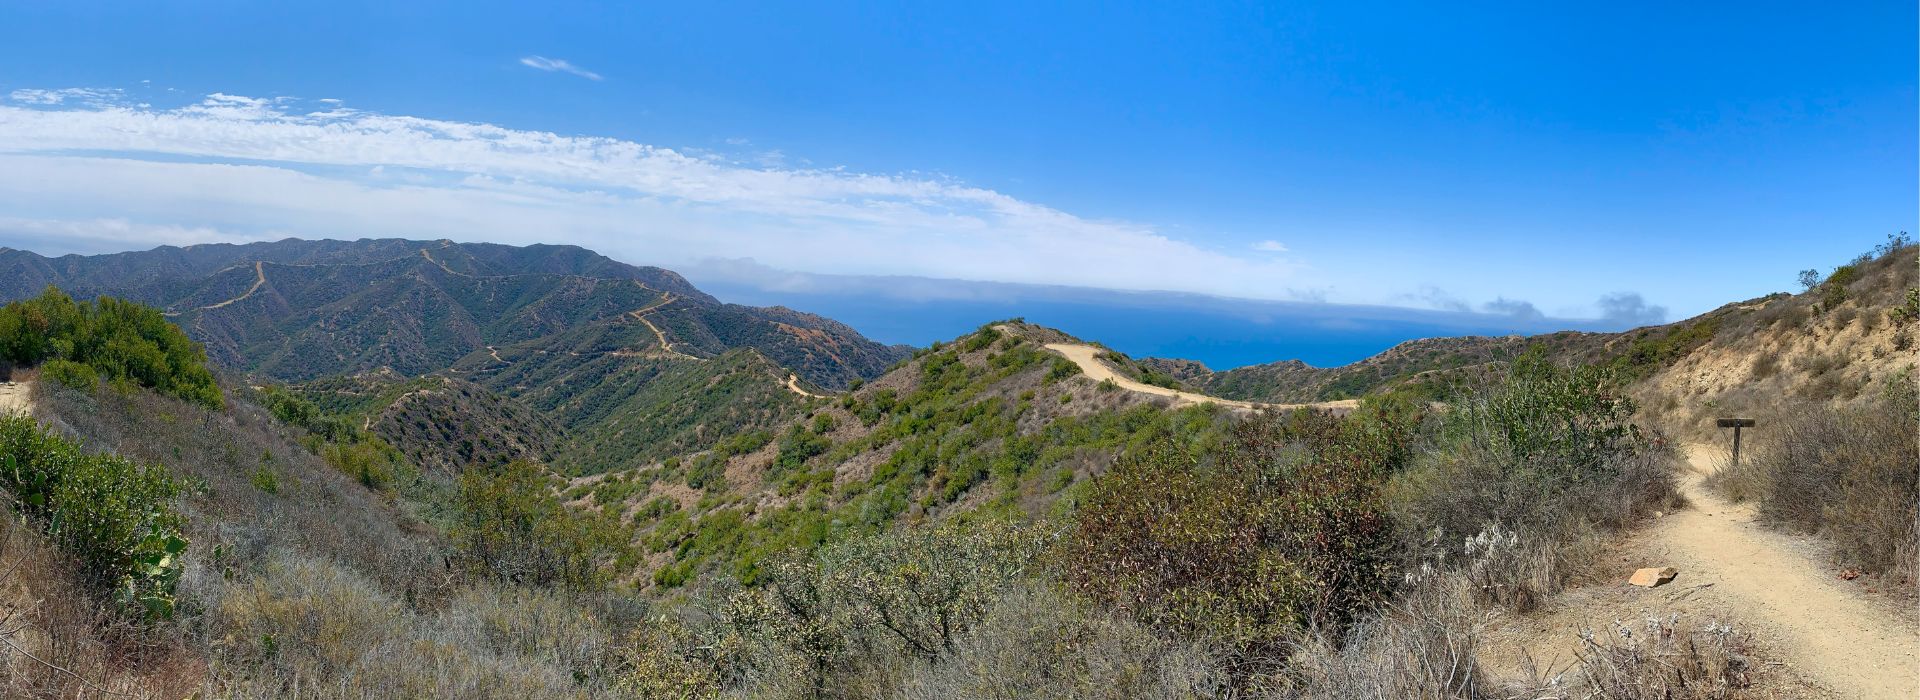 A view of the hiking trails in the hills of Catalina Island. Photo Credit to Shane Sabicer.